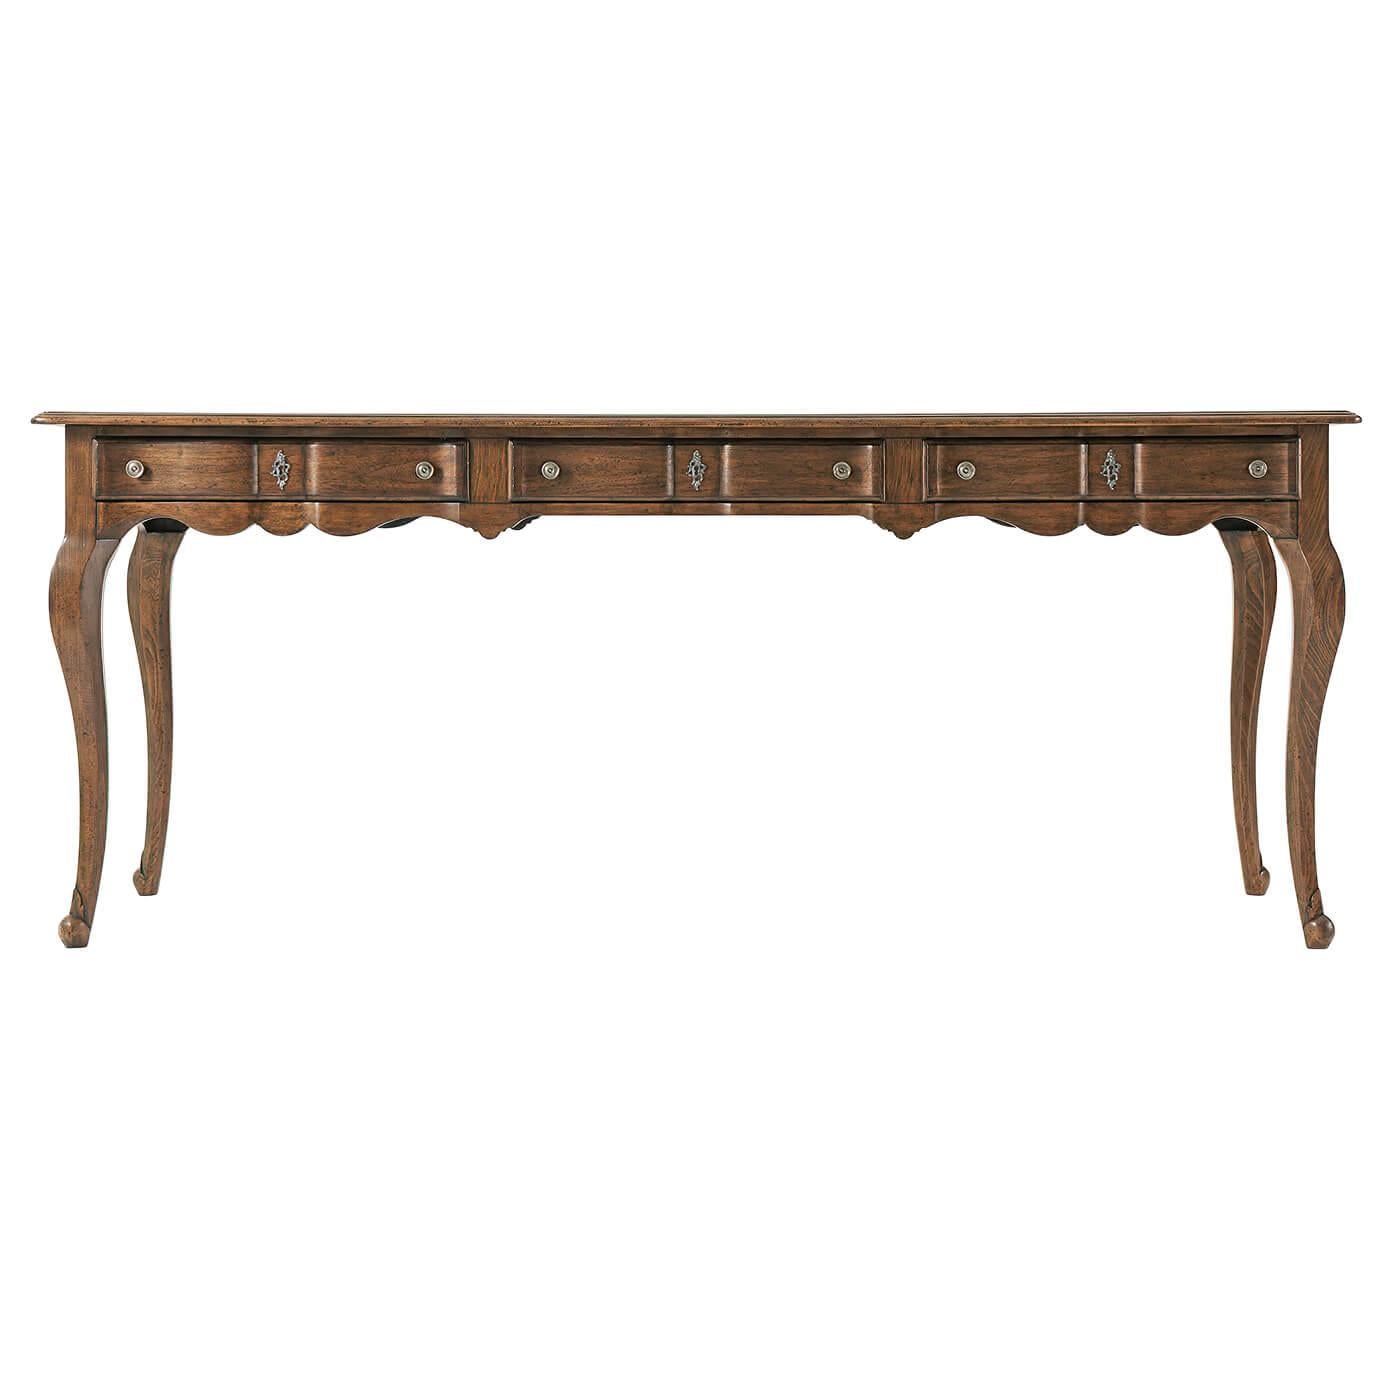 French Provincial carved beach and walnut bureau plat or writing table with a slightly antiqued and distressed finish, serpentine molded edge top, three molded edge serpentine front drawers with scalloped frieze, brass handles and escutcheons on